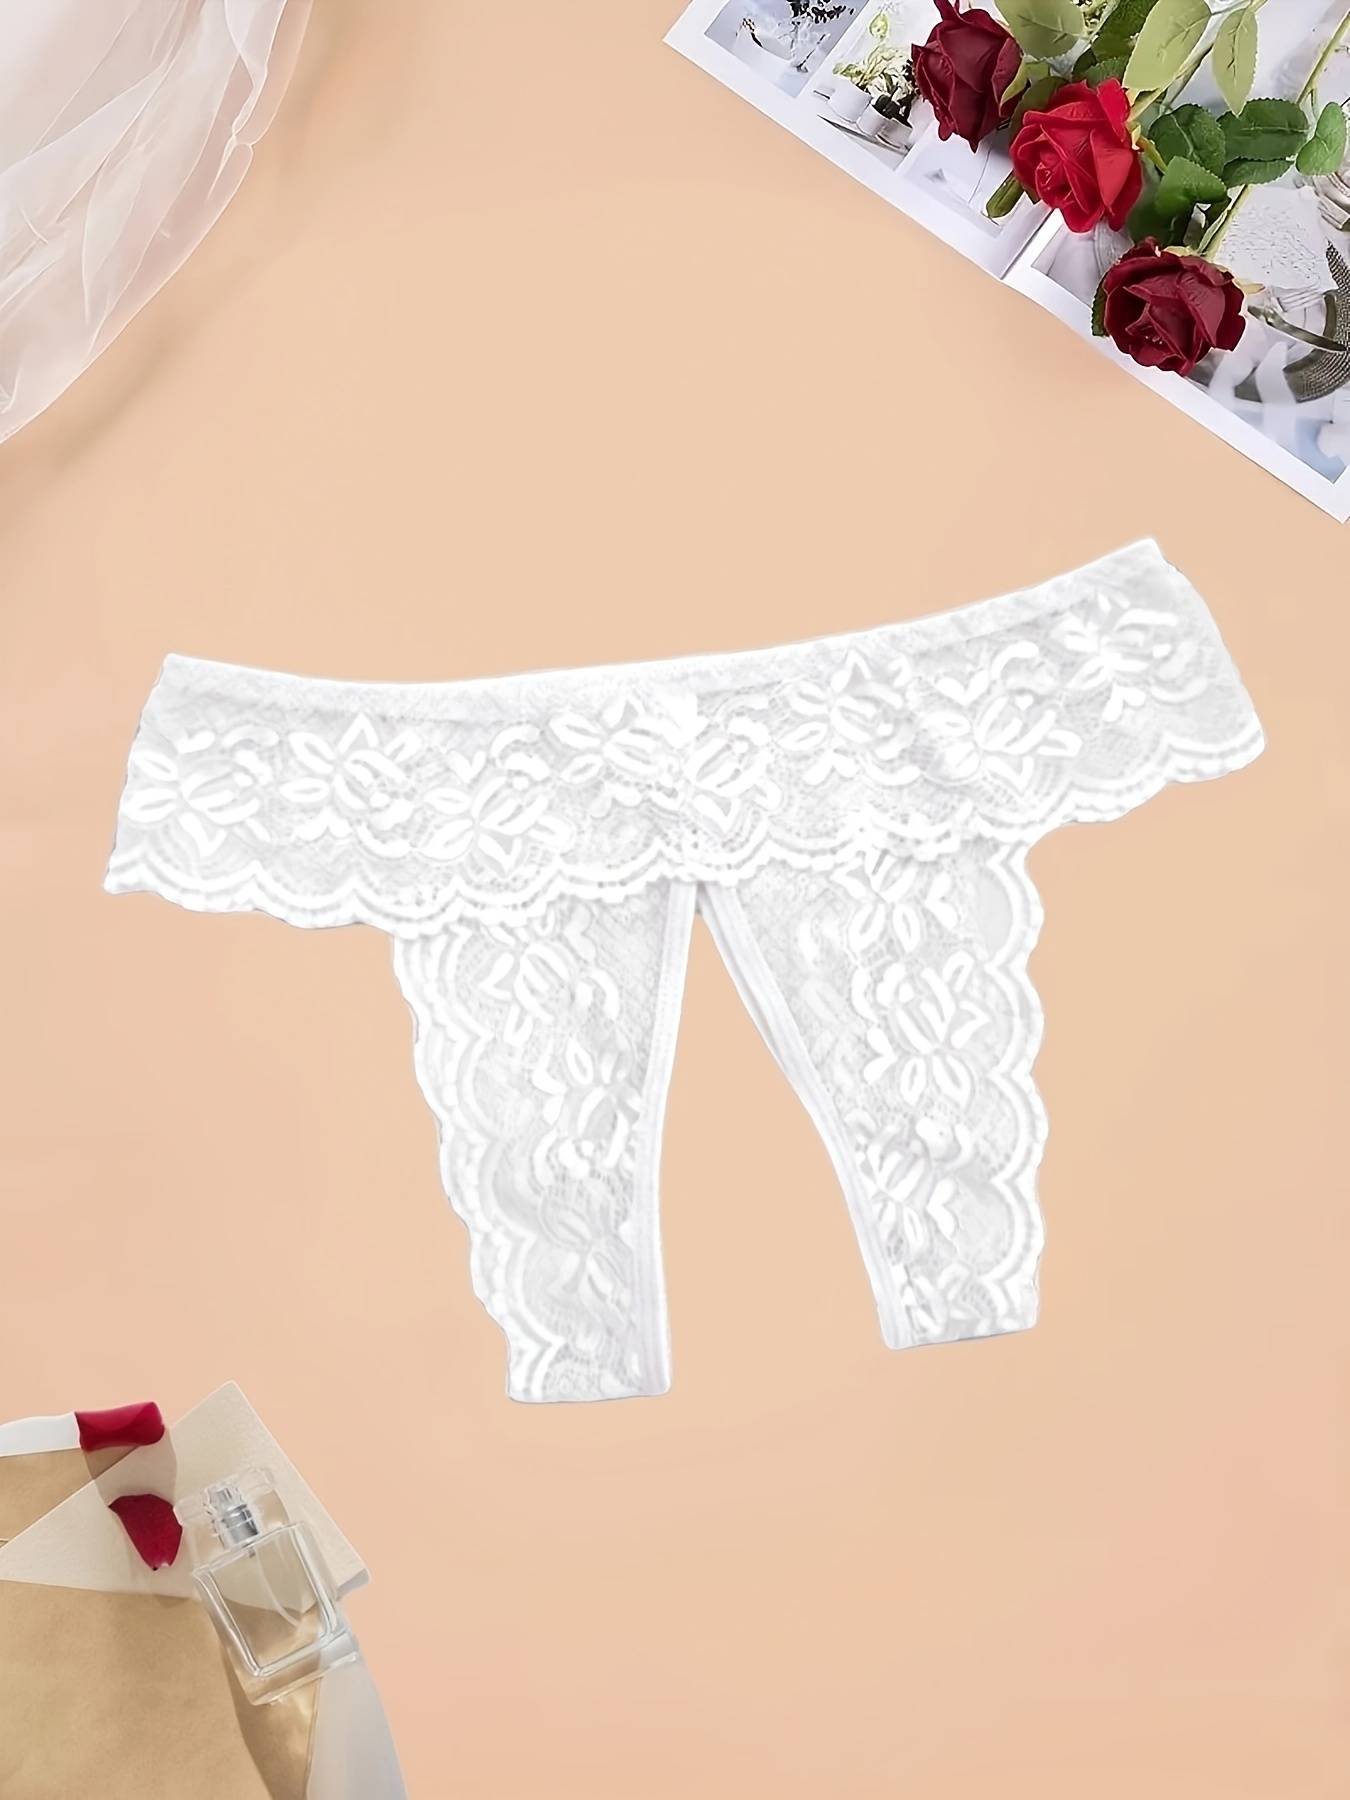 Women's Lace Panties Crotchless Underwear Thongs Lingerie G-string